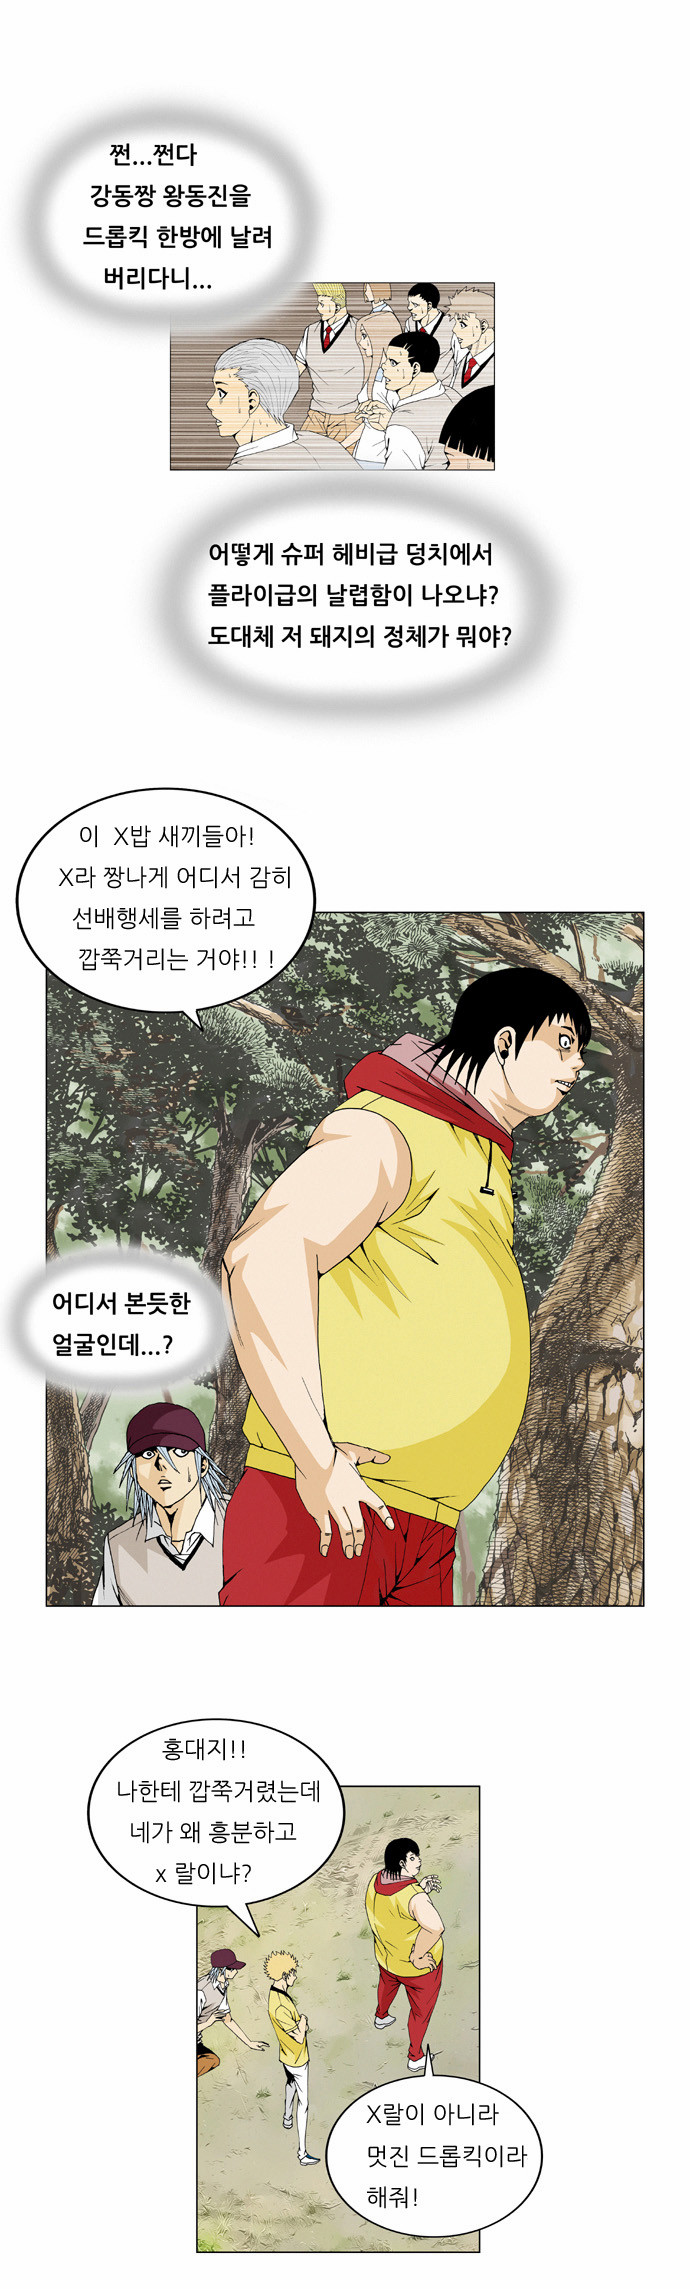 Ultimate Legend - Kang Hae Hyo - Chapter 32 - Page 4